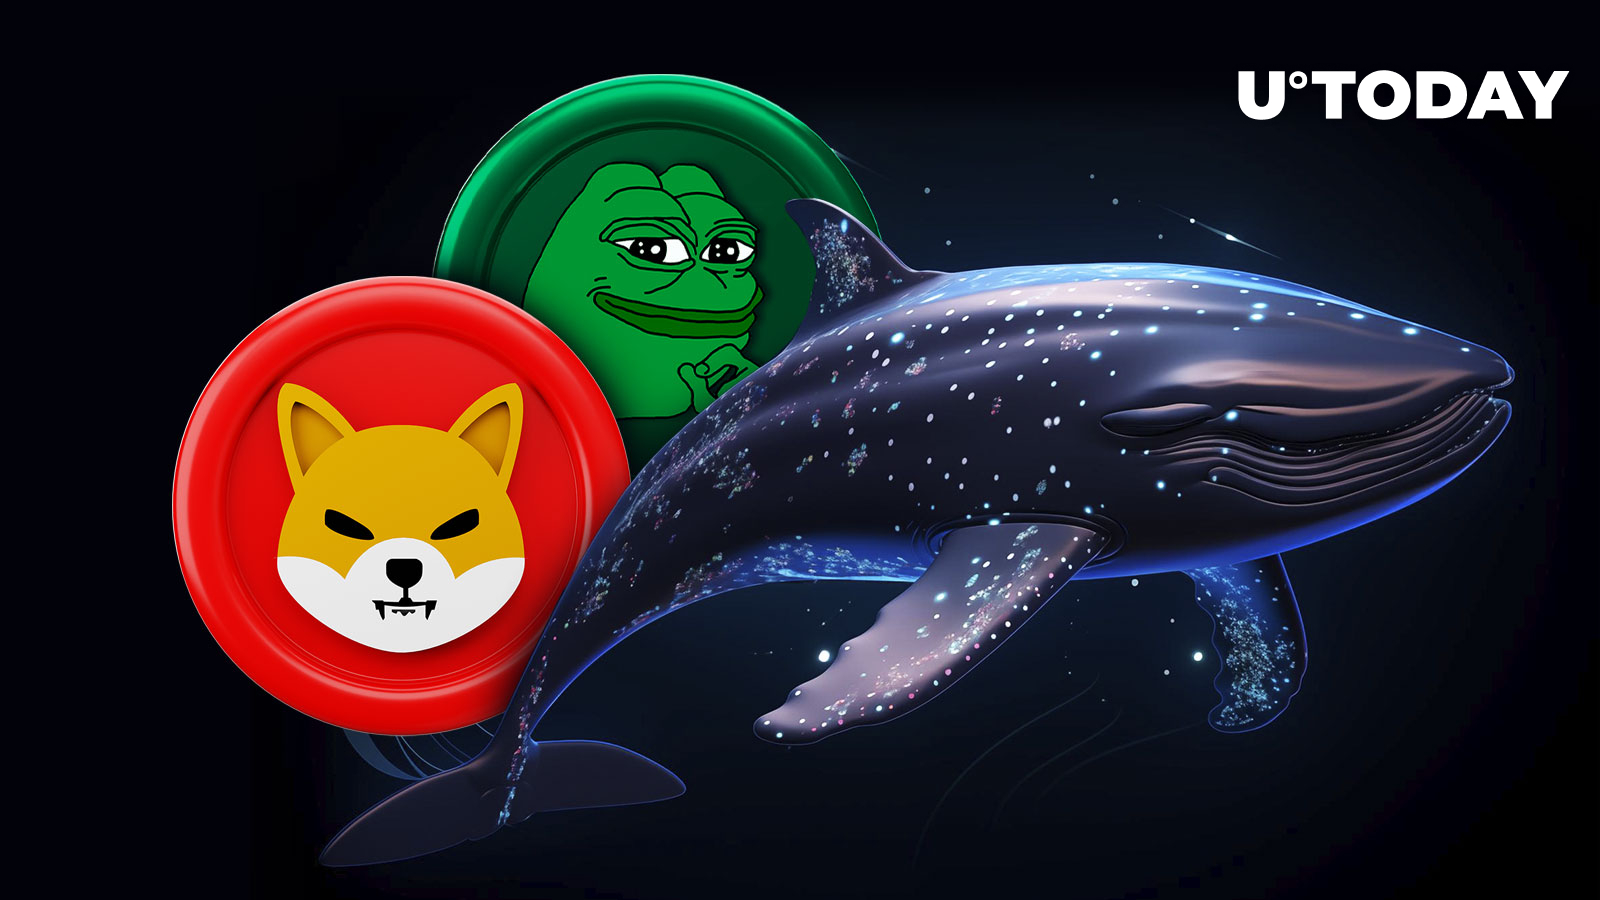 Whale Banks $3.49M from PEPE, Moves Major Stake into SHIB and Other Coins